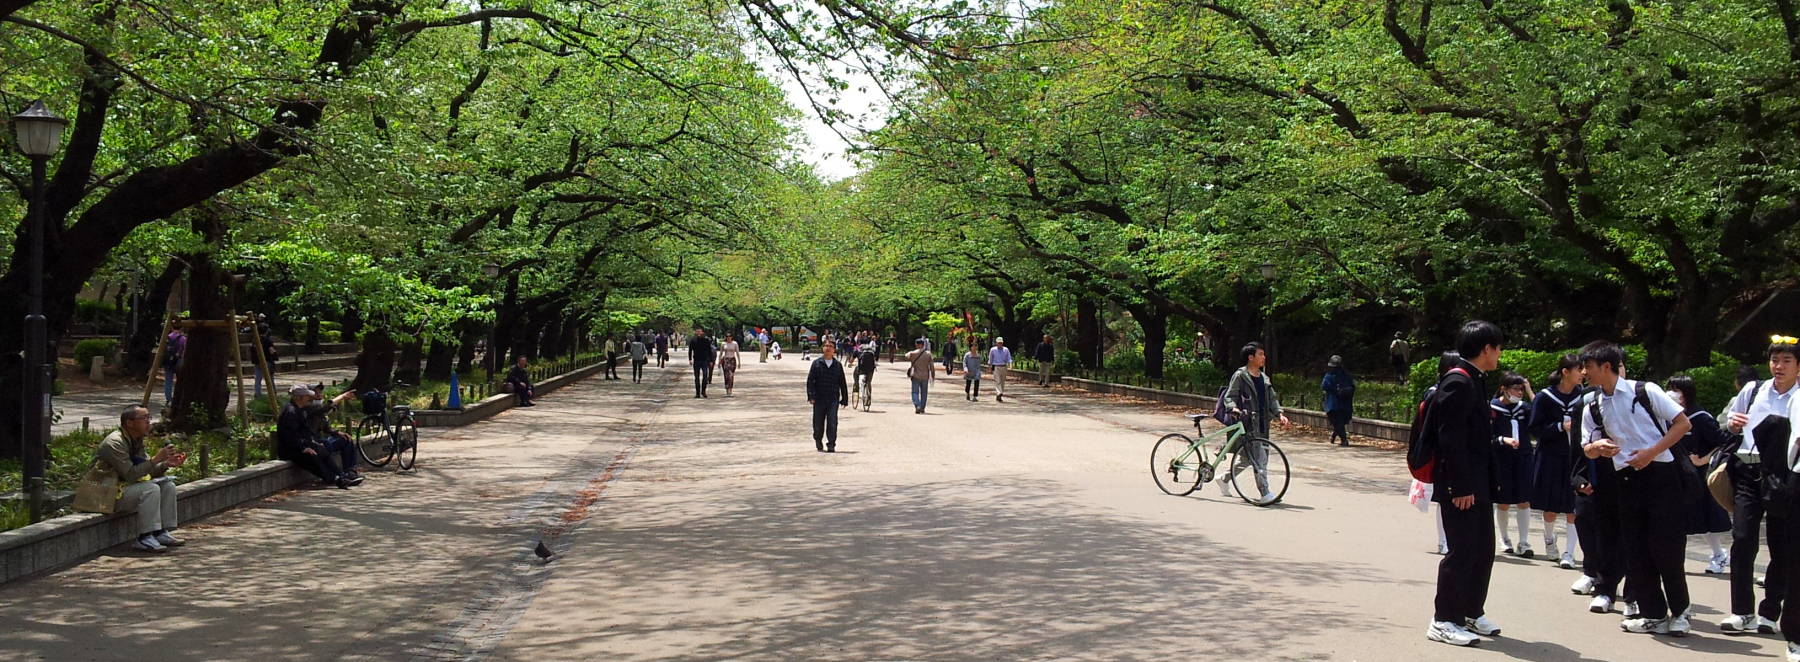 People enjoying Ueno Park on a sunny spring day